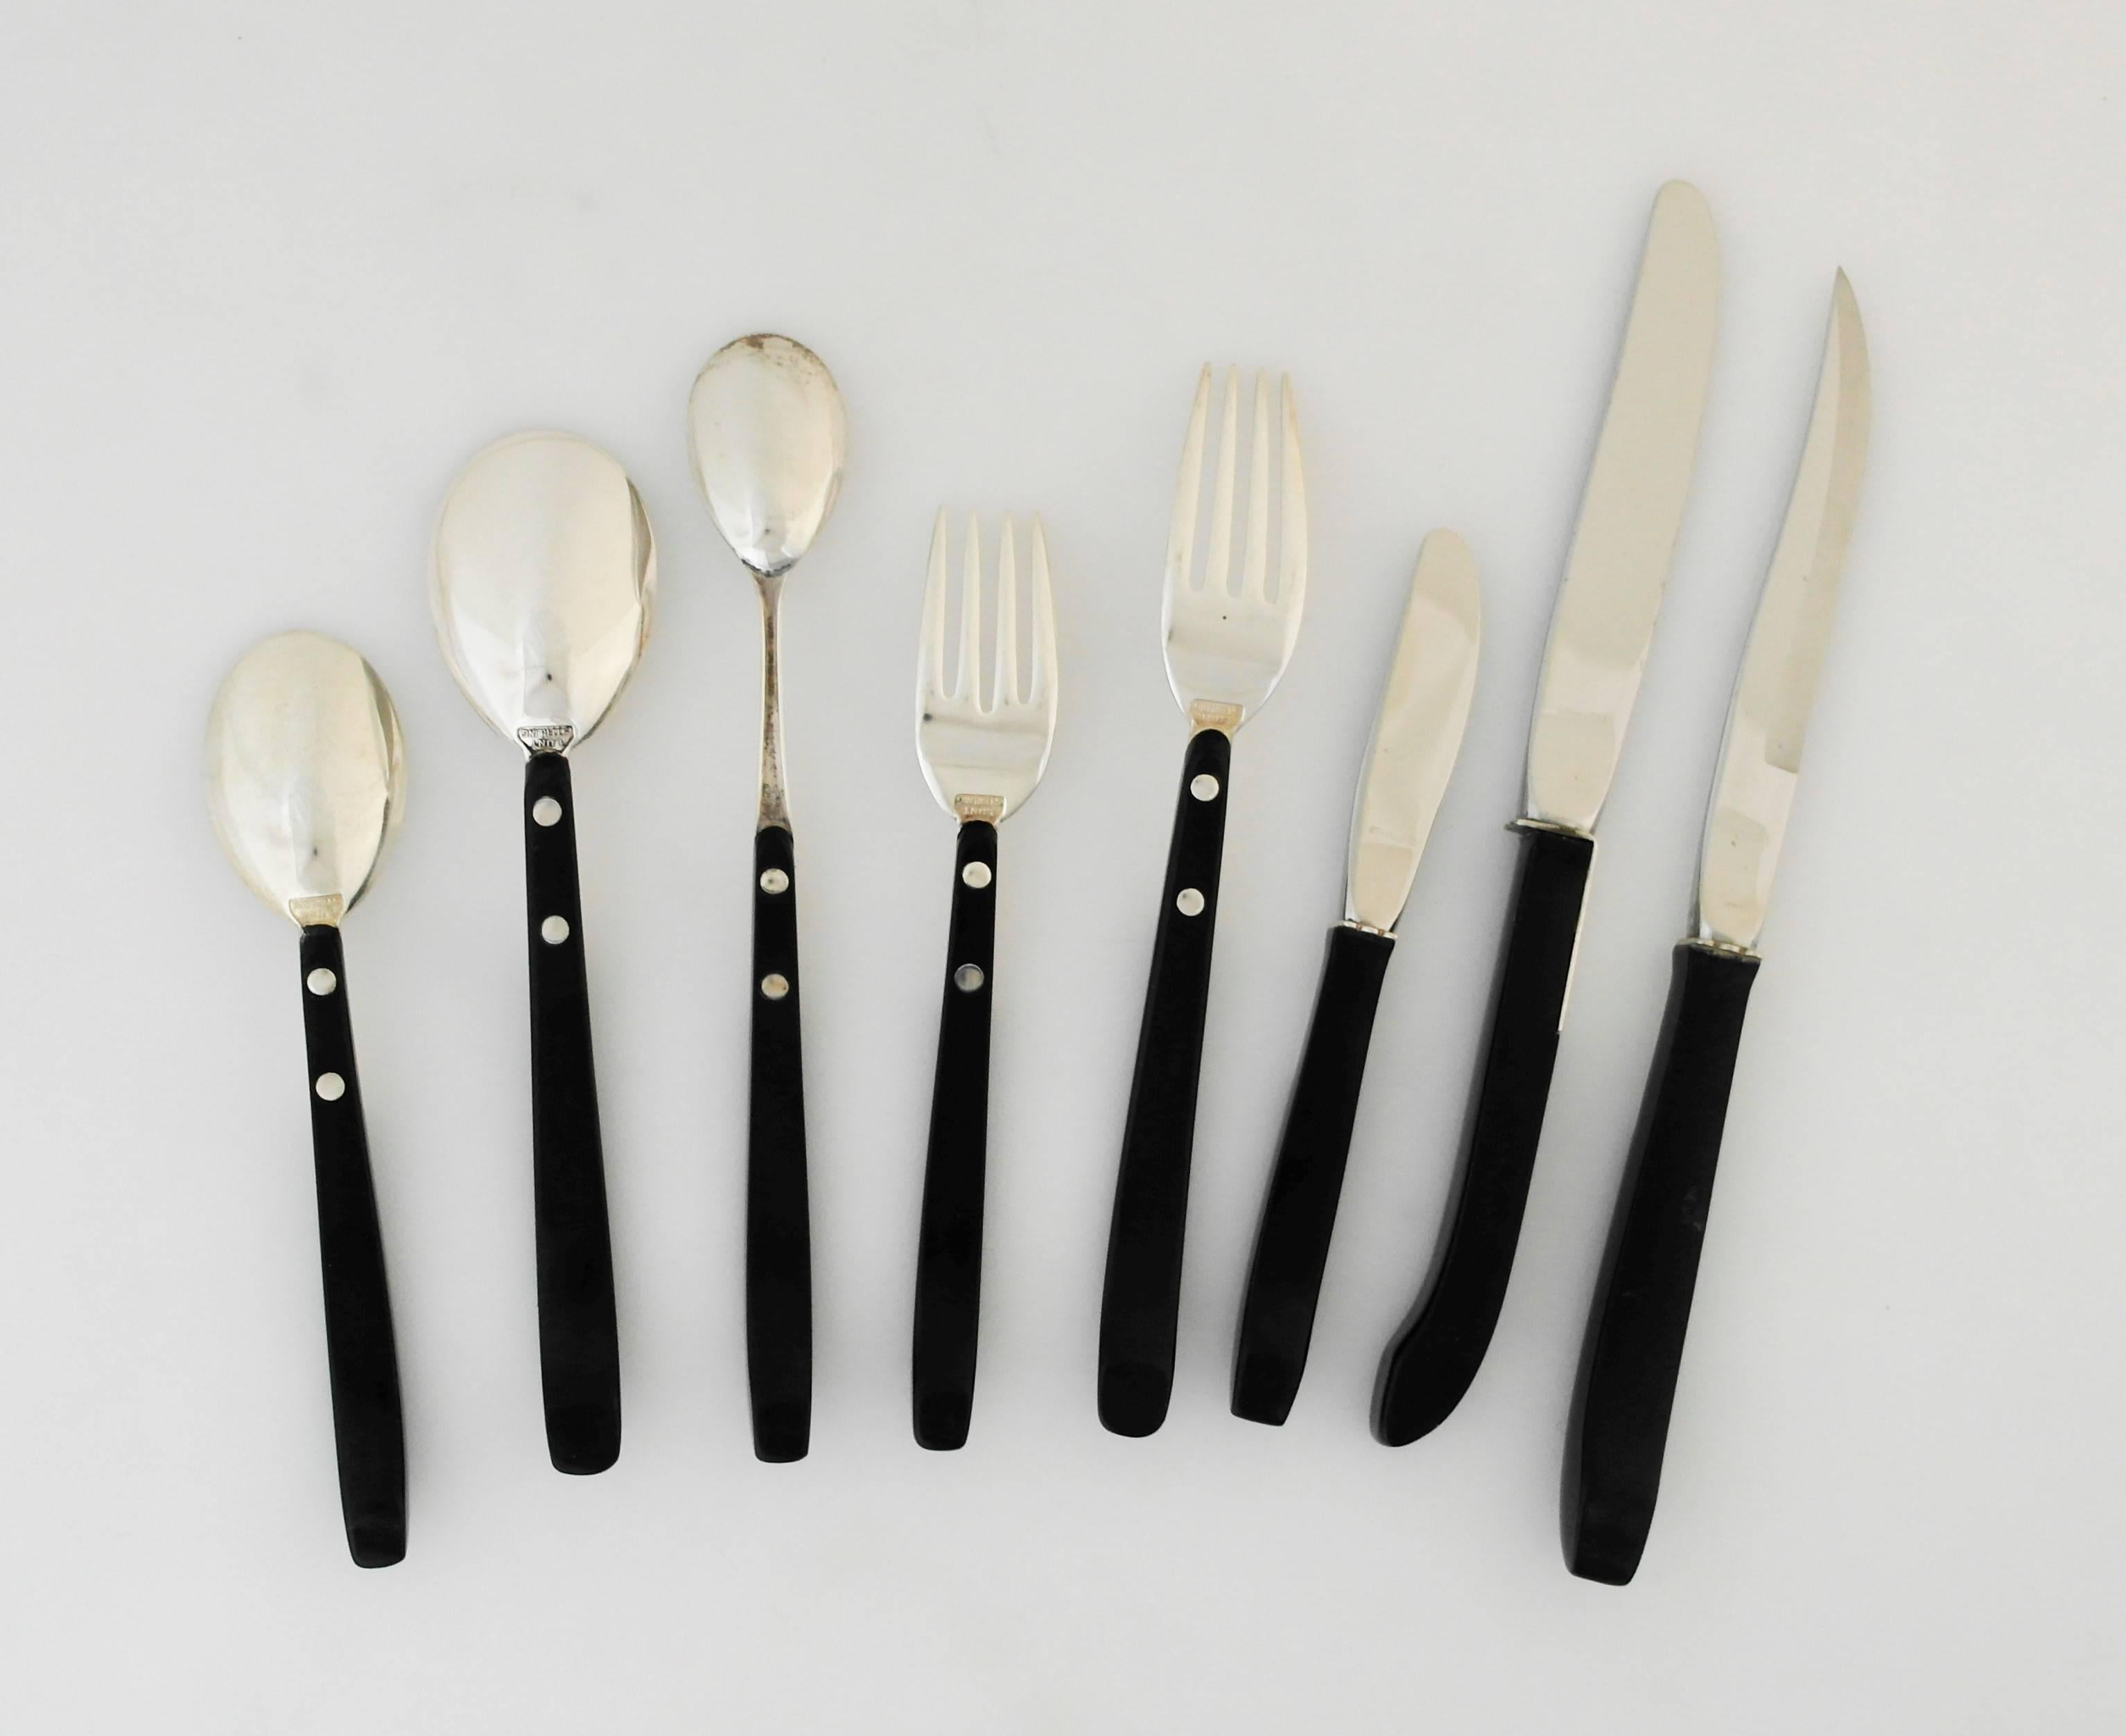 Being offered is a fine, circa 1956 sterling silver flatware set designed by Nord Bowlen for Lunt, of Greenfield, MA, using black nylon handles as a glorious counterpoint to sterling silver and emphasizing the combination of silver and plastics in